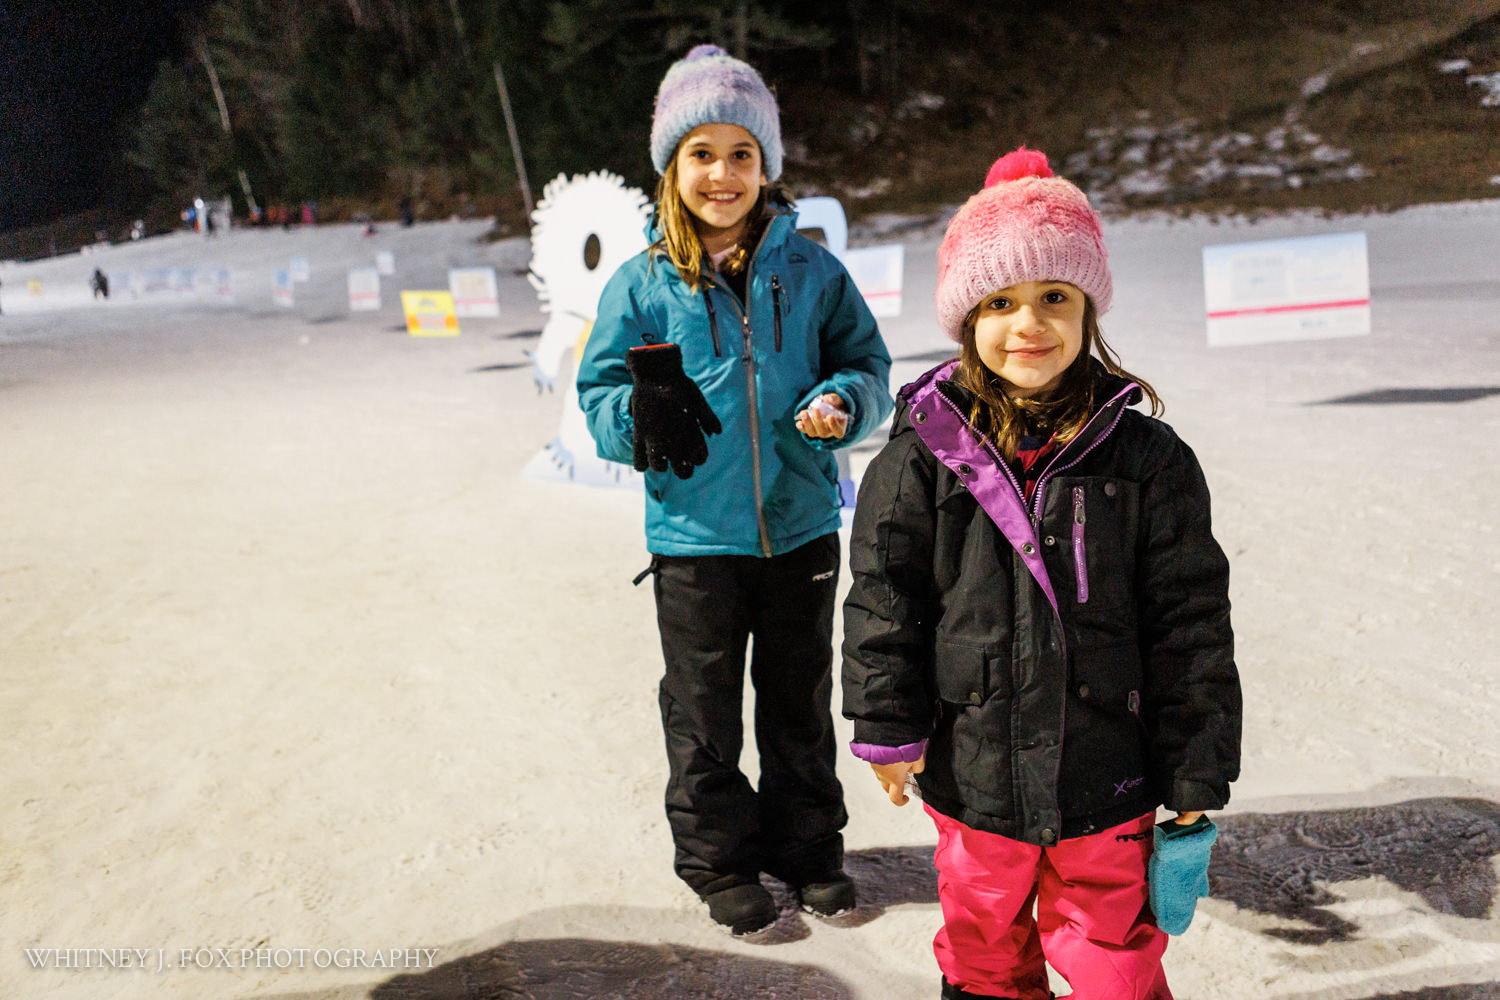 148 winter kids welcome to winter 2022 lost valley auburn maine documentary event photographer whitney j fox 4141 w